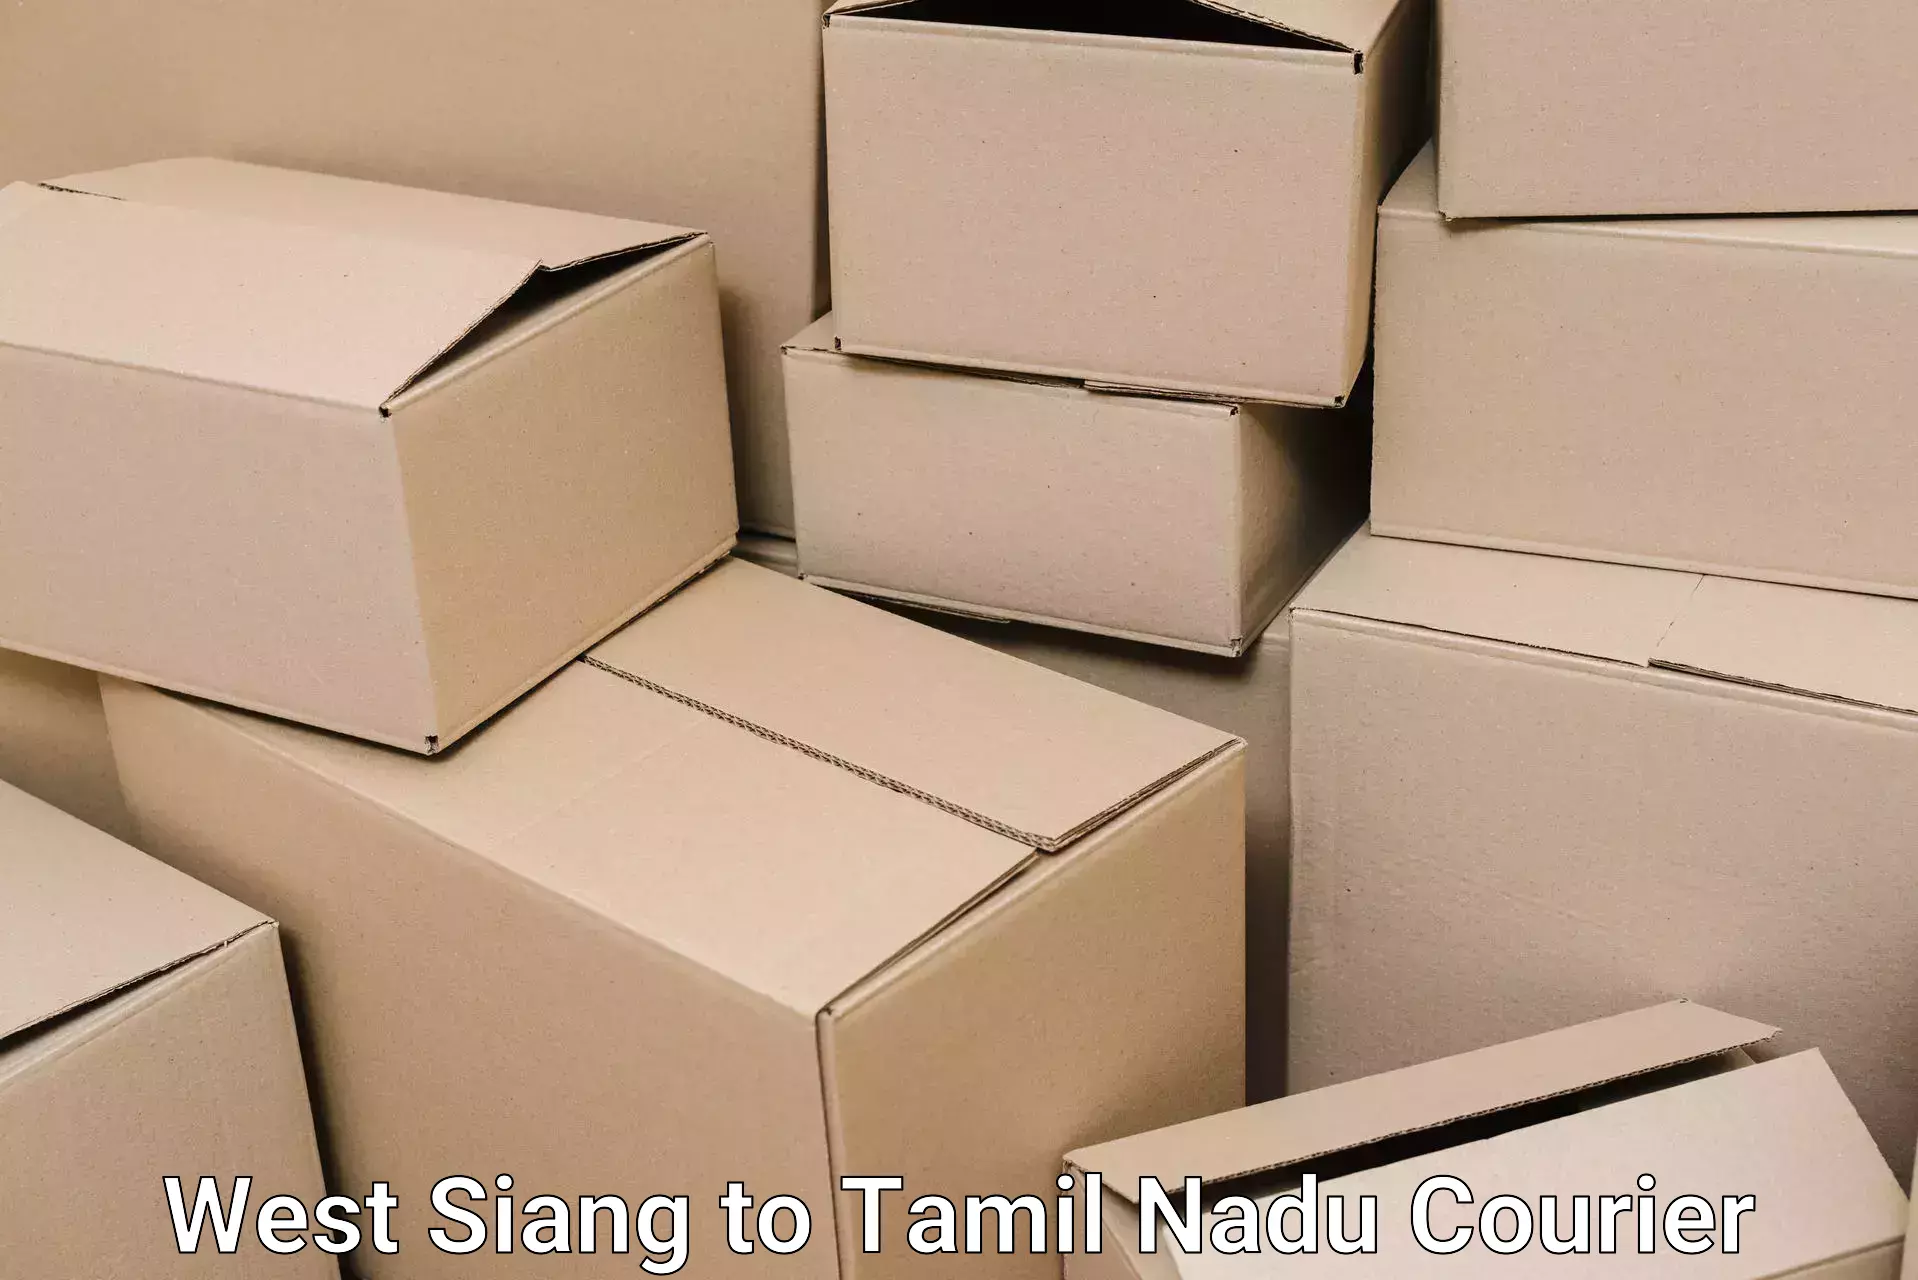 Trusted furniture transport in West Siang to Tamil Nadu